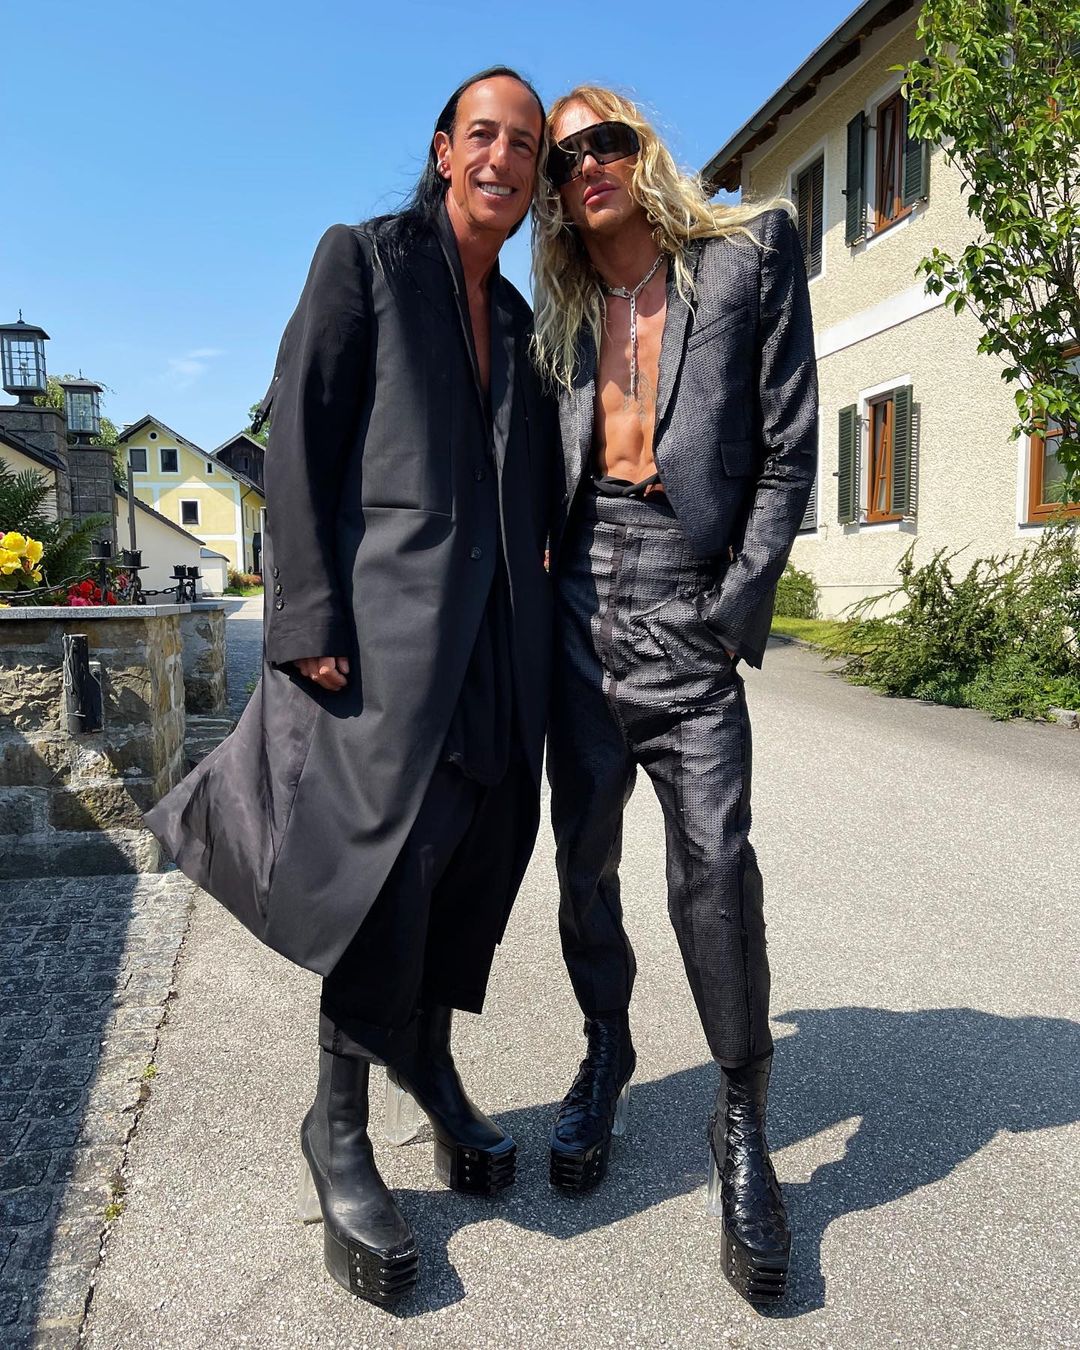 SPOTTED: Rick Owens and Tyrone Dylan attend wedding in Expectedly ...